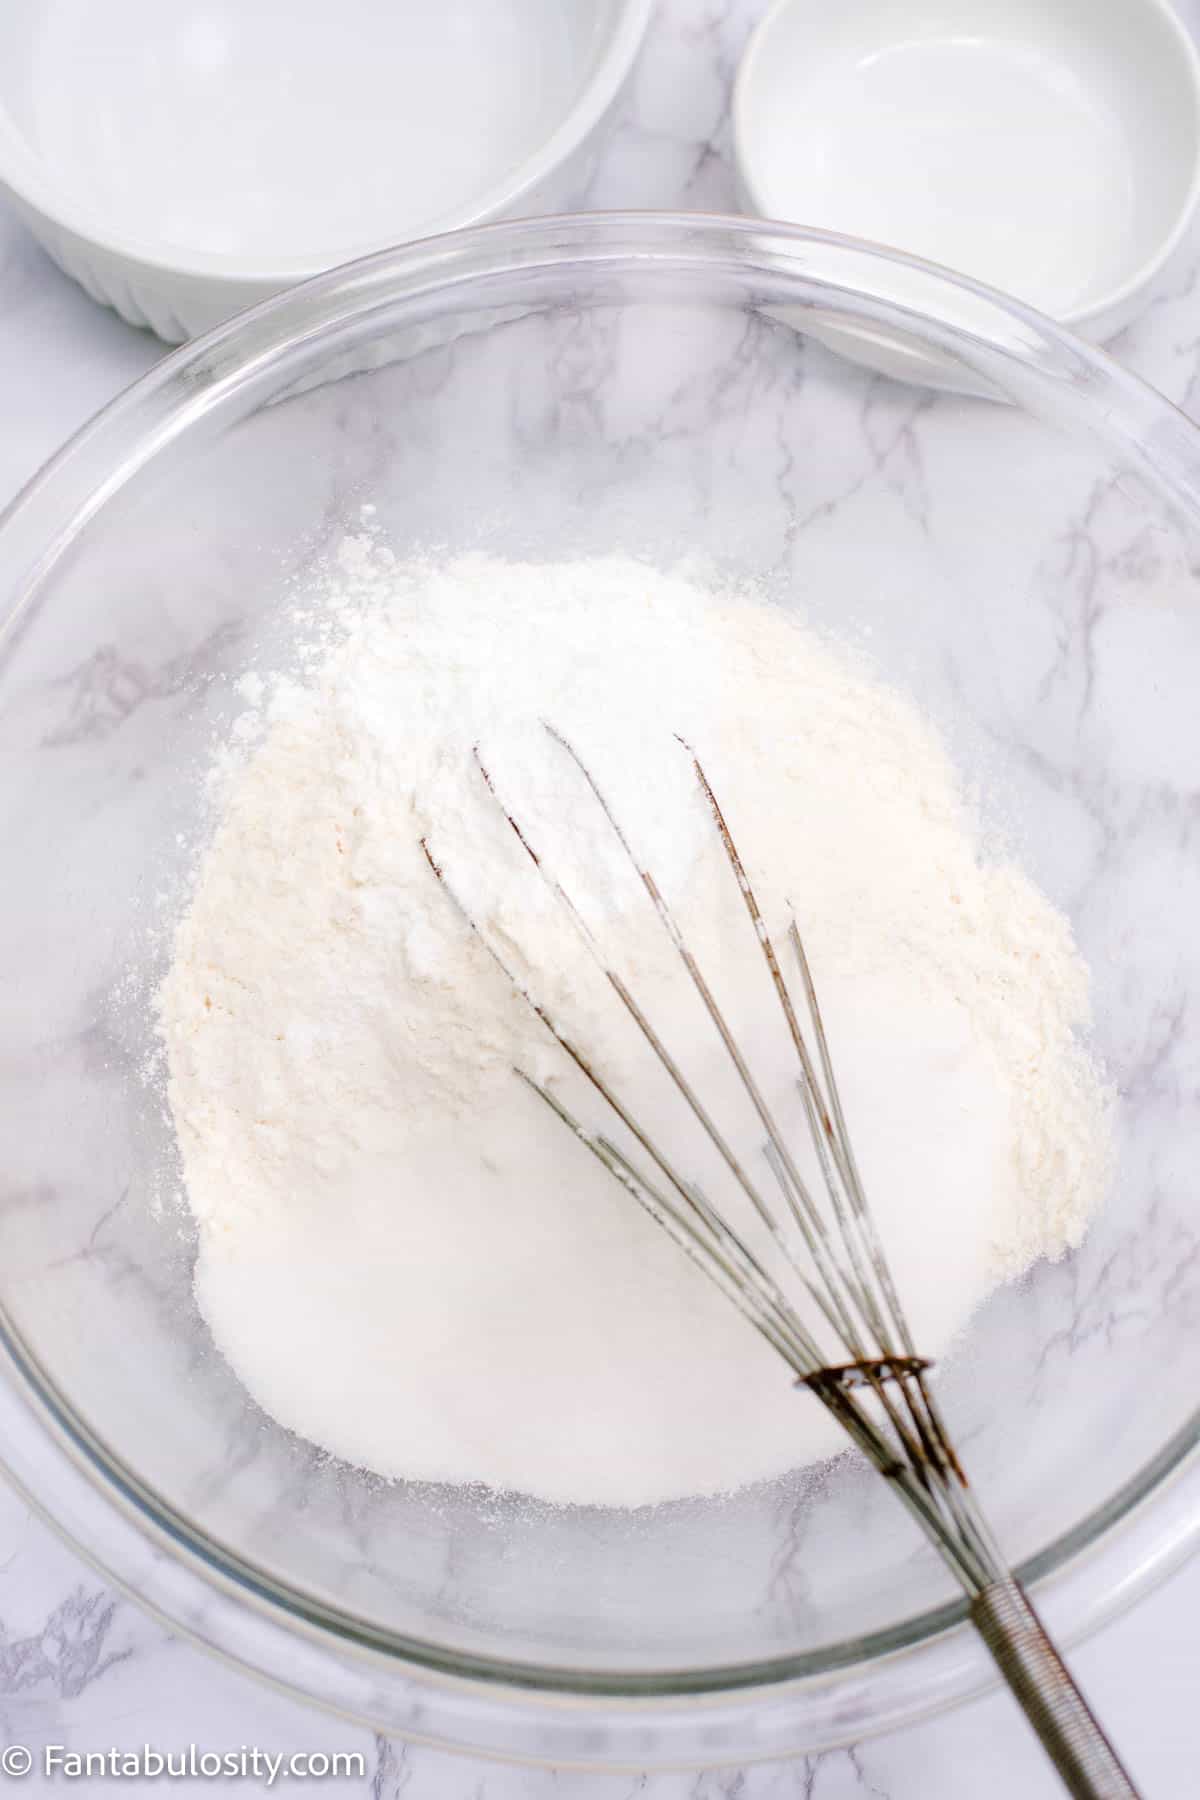 A whisk mixing up dry ingredients in a glass bowl.